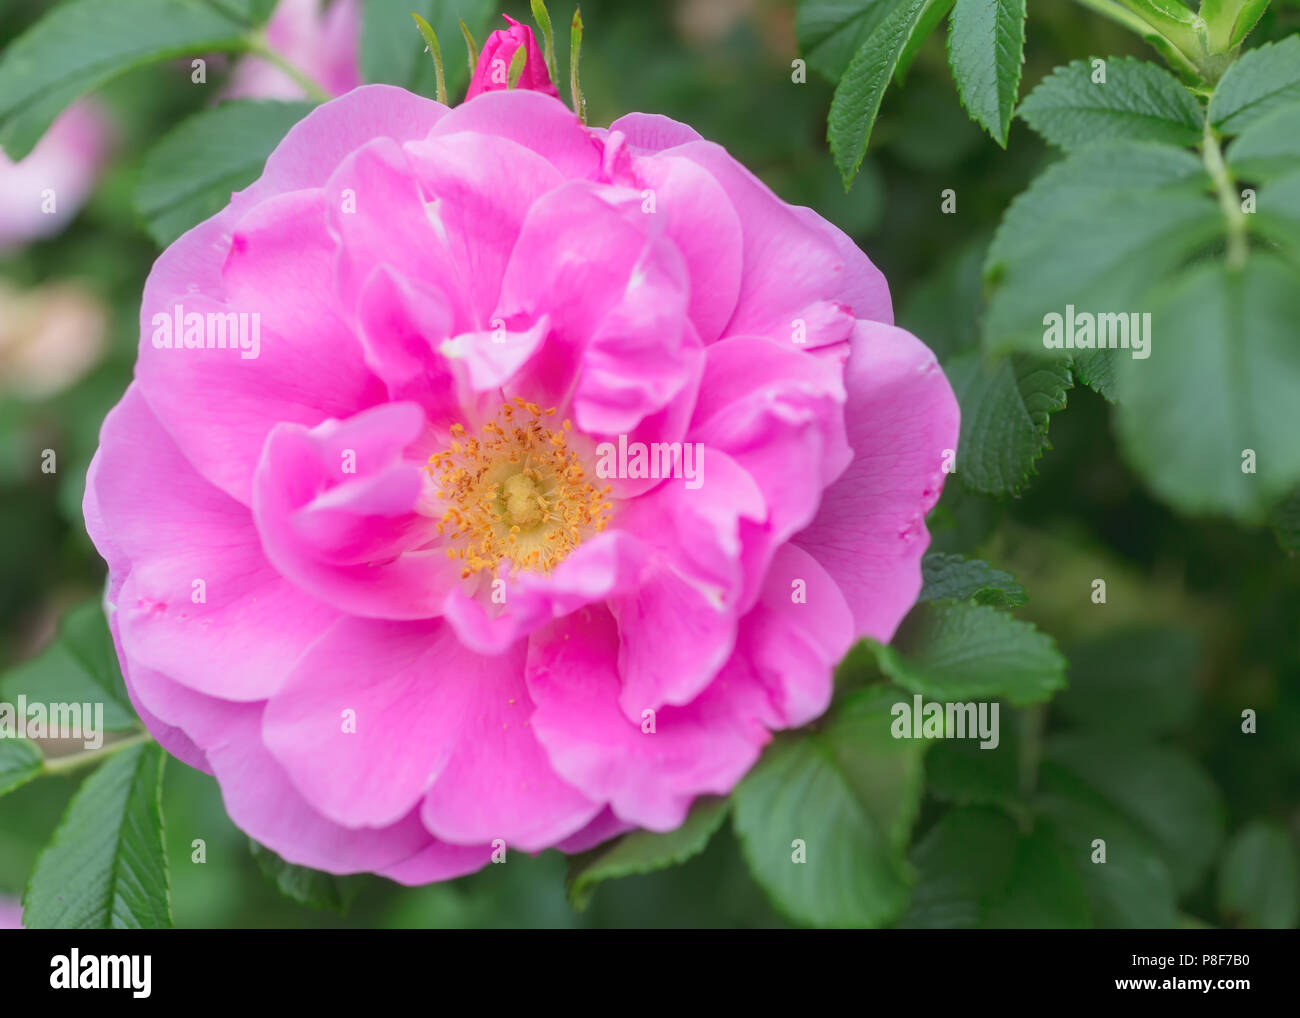 Hardy rugusa rose flower in the home garden. Stock Photo